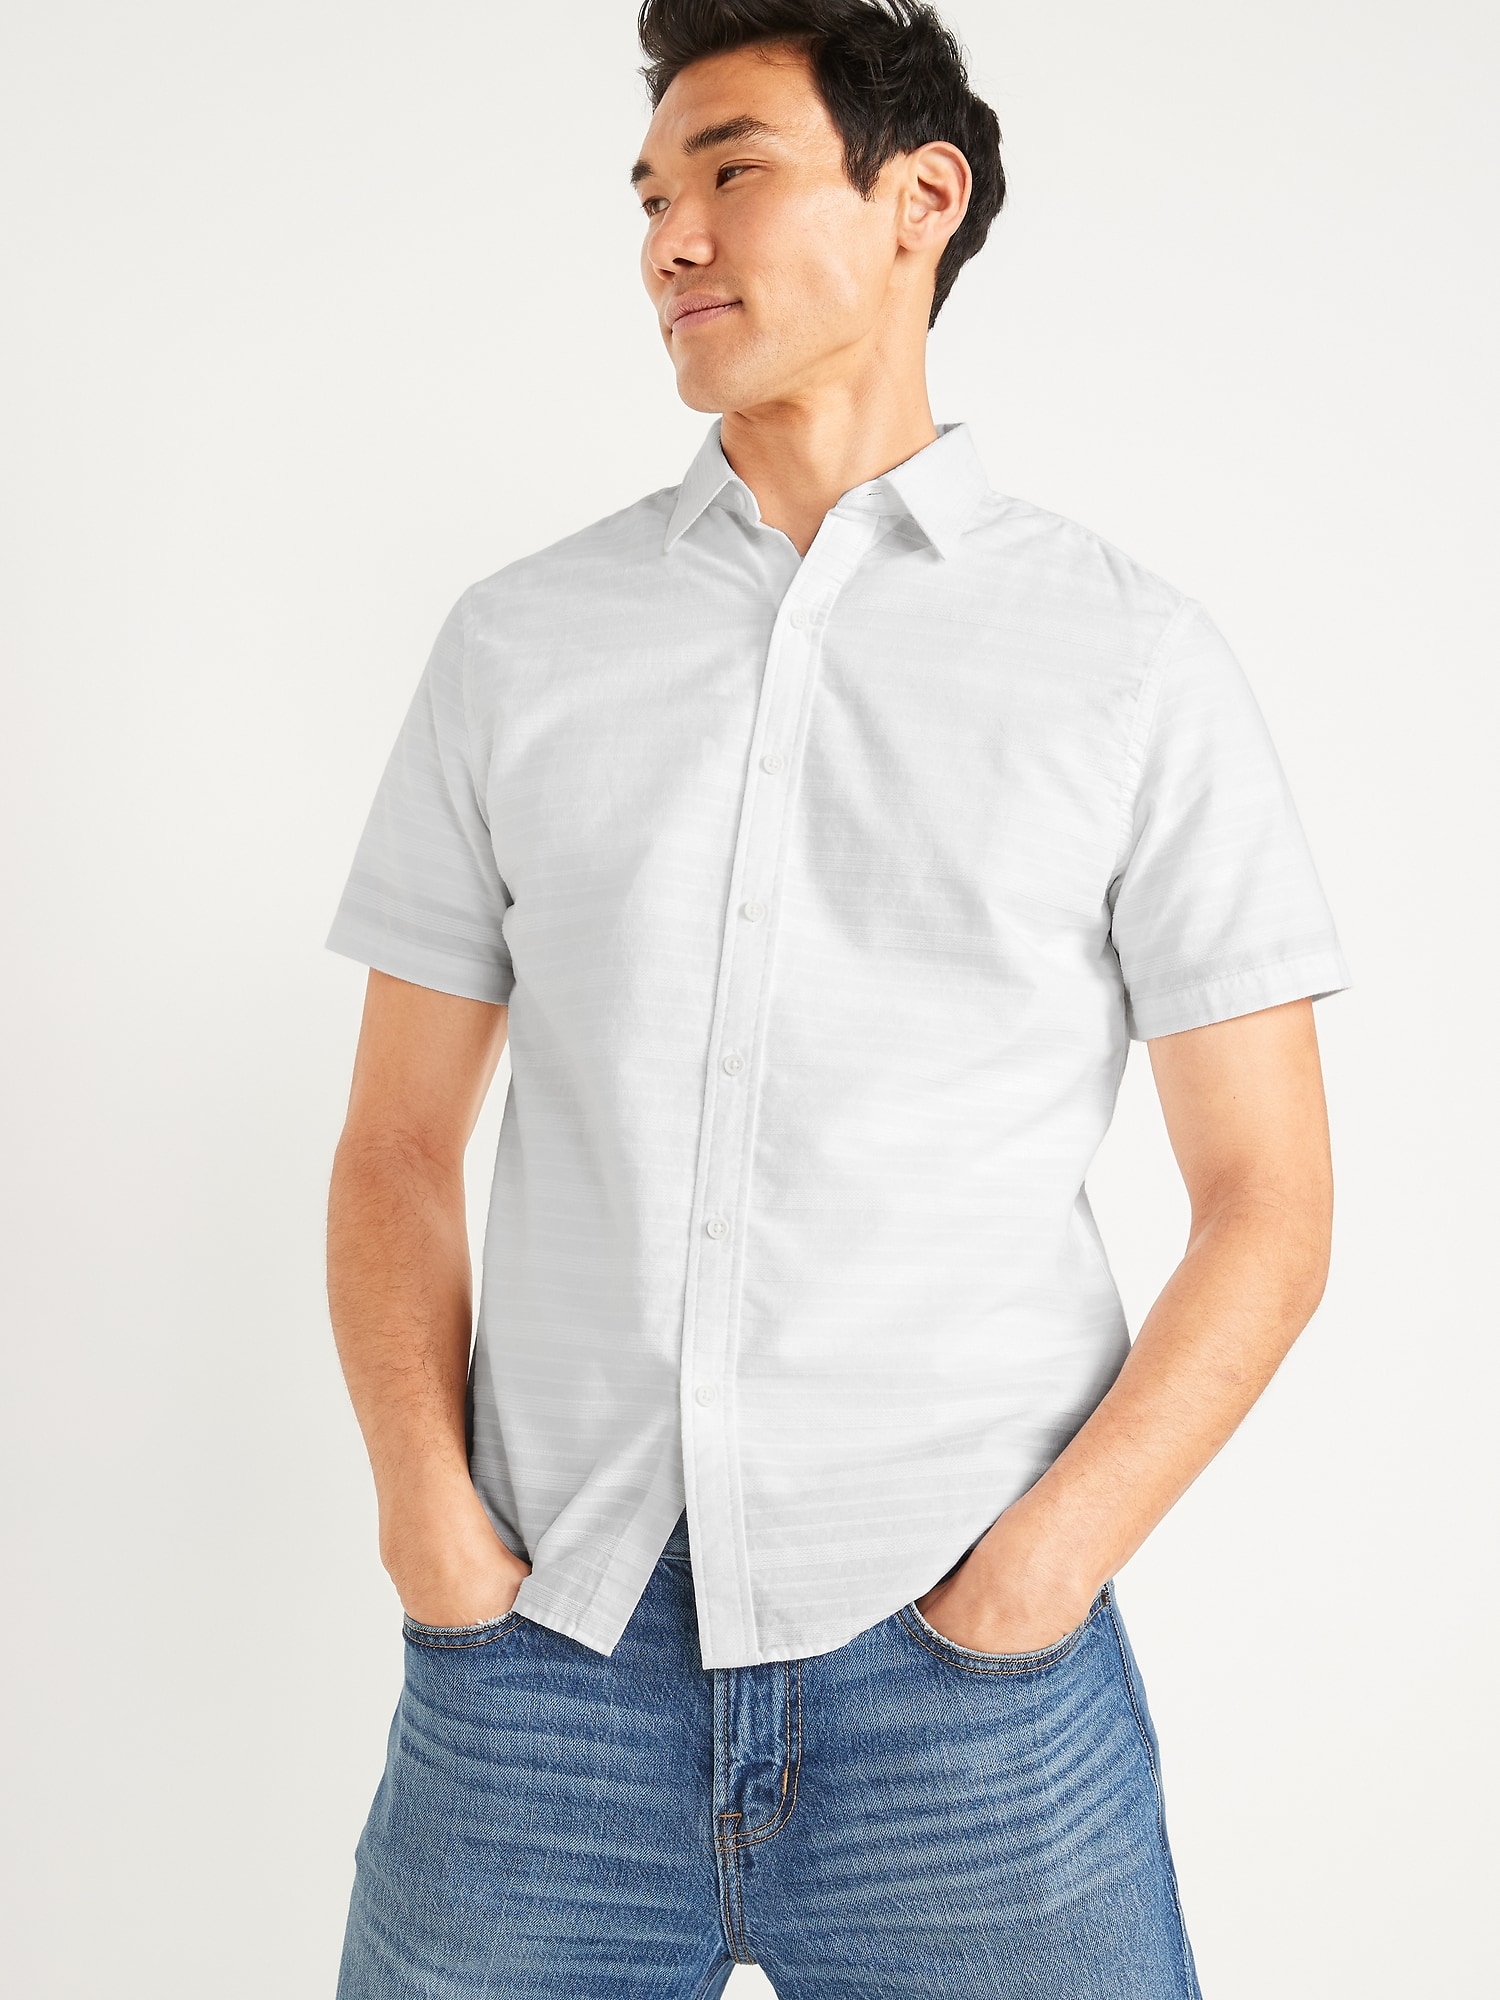 Classic Fit Textured Dobby Everyday Shirt | Old Navy